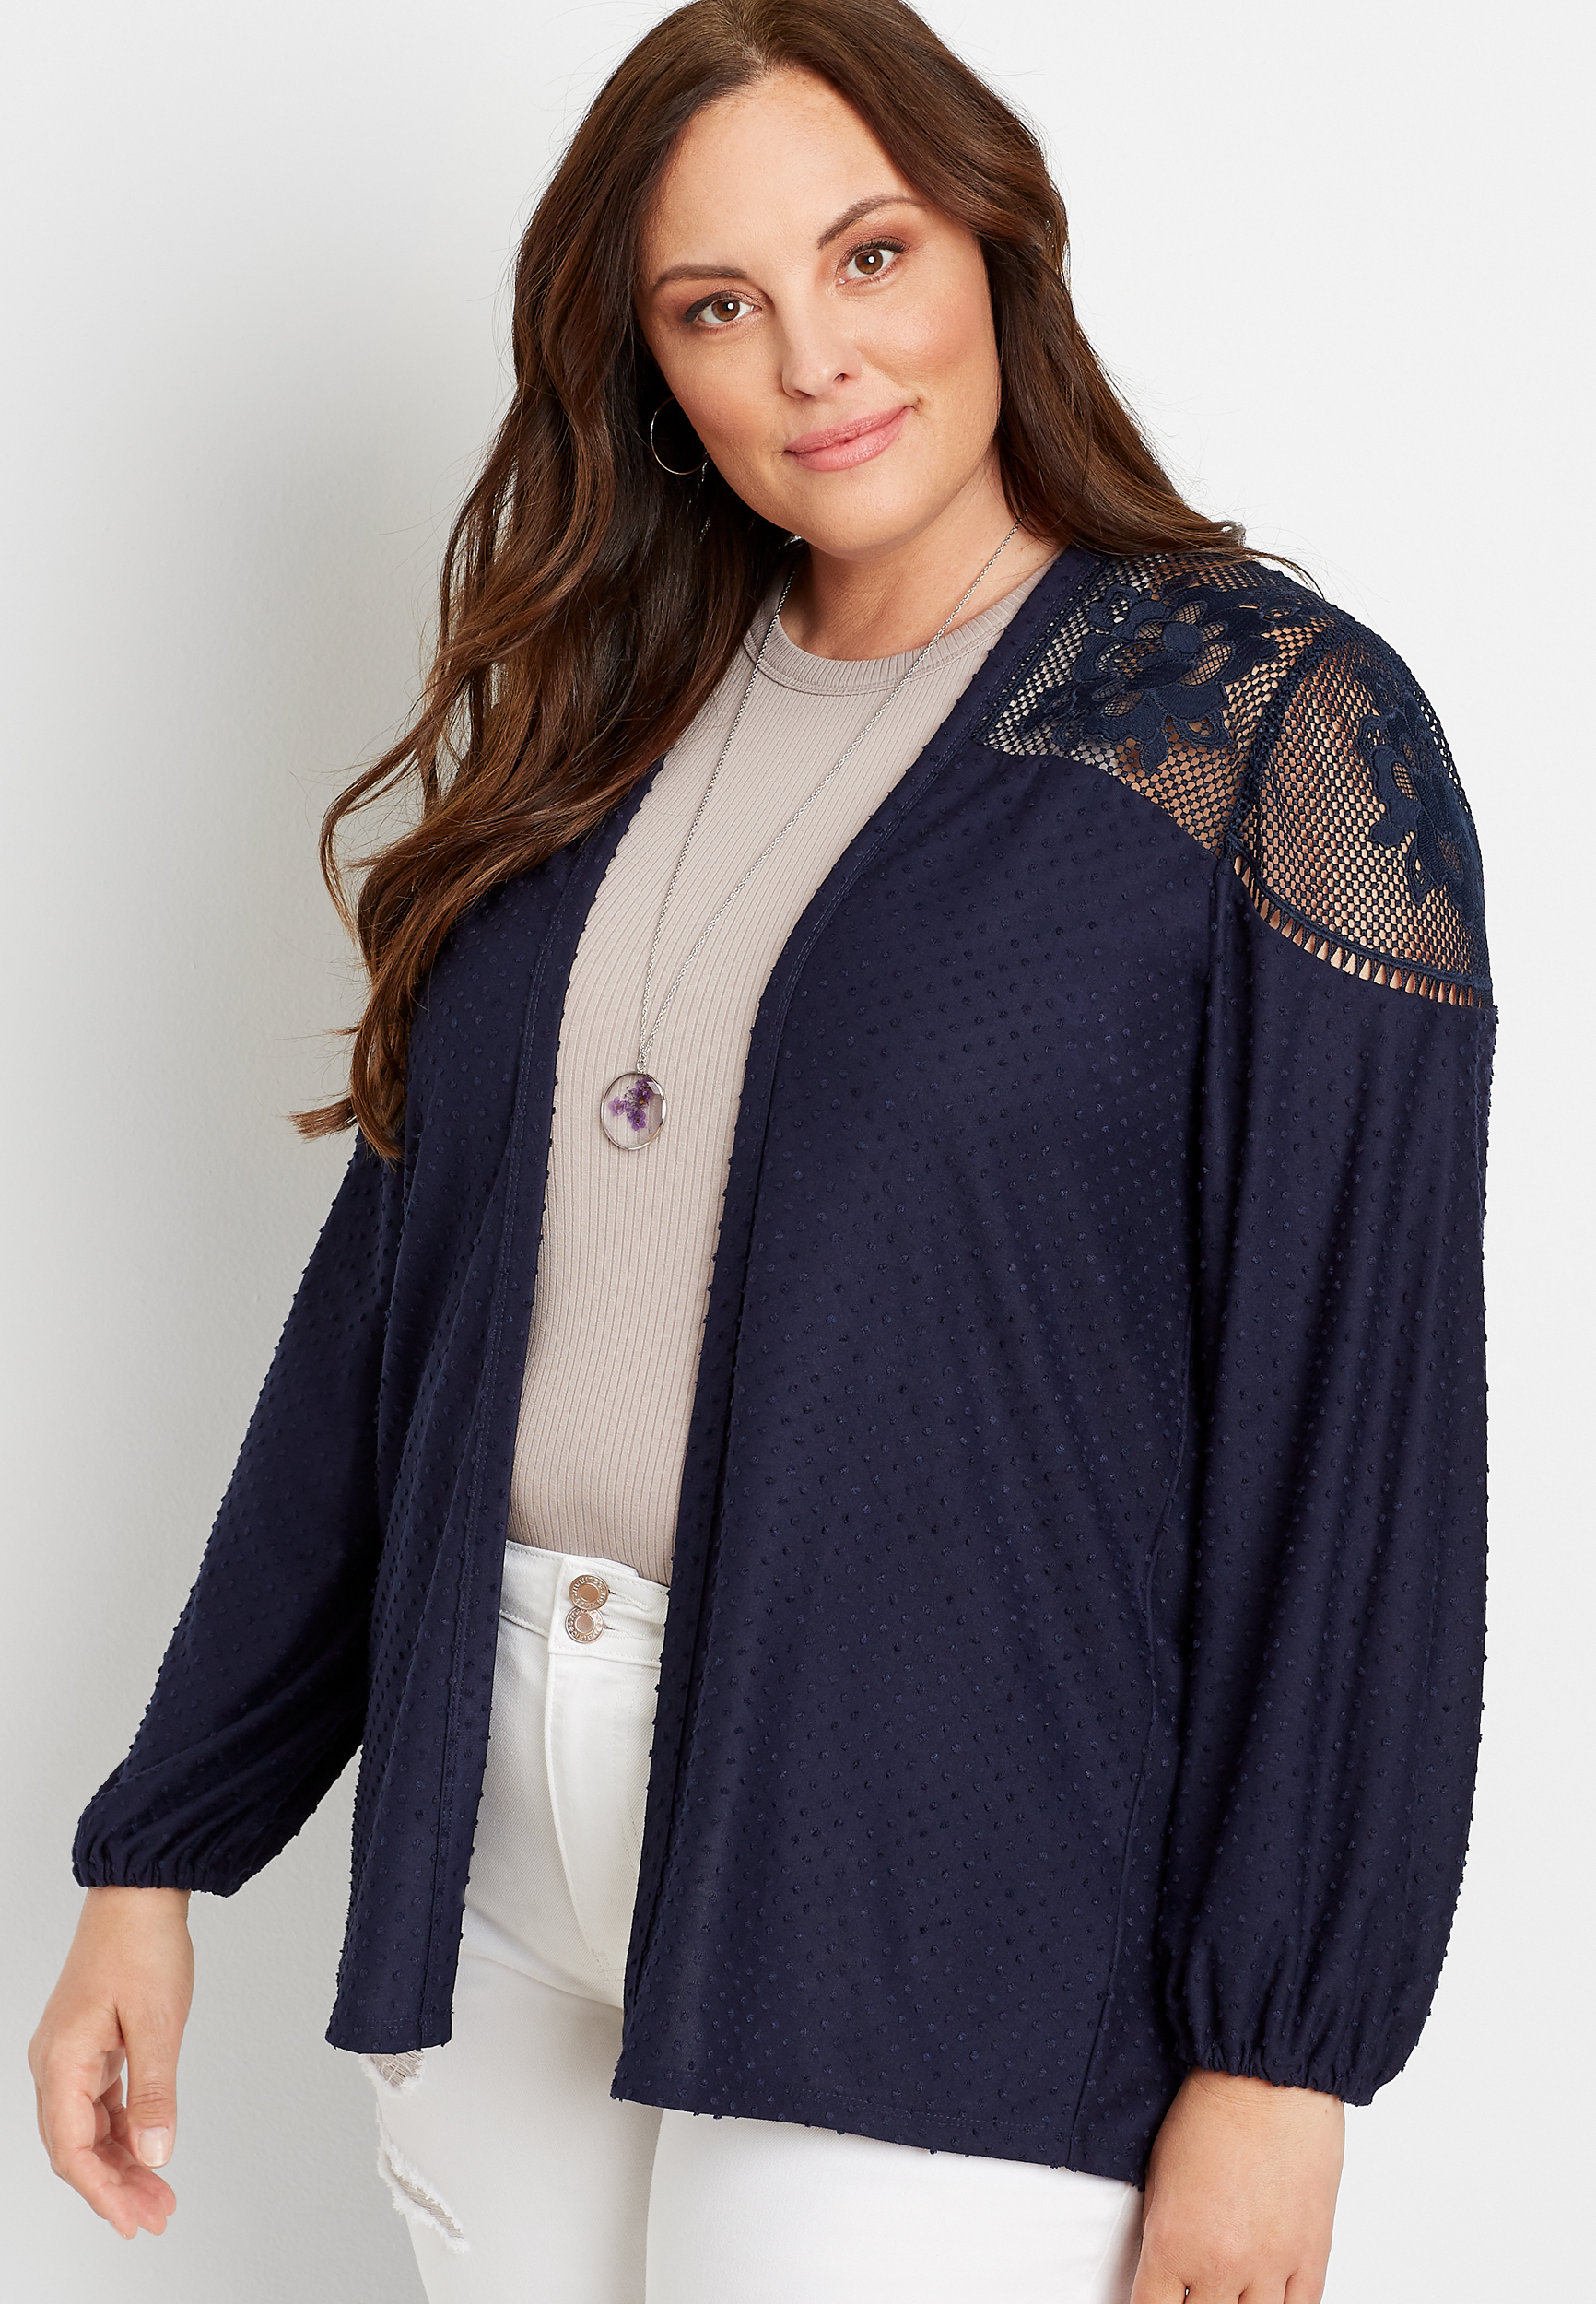 Plus Size Navy Lace Yoke Swiss Dot Open Front Cardigan | maurices